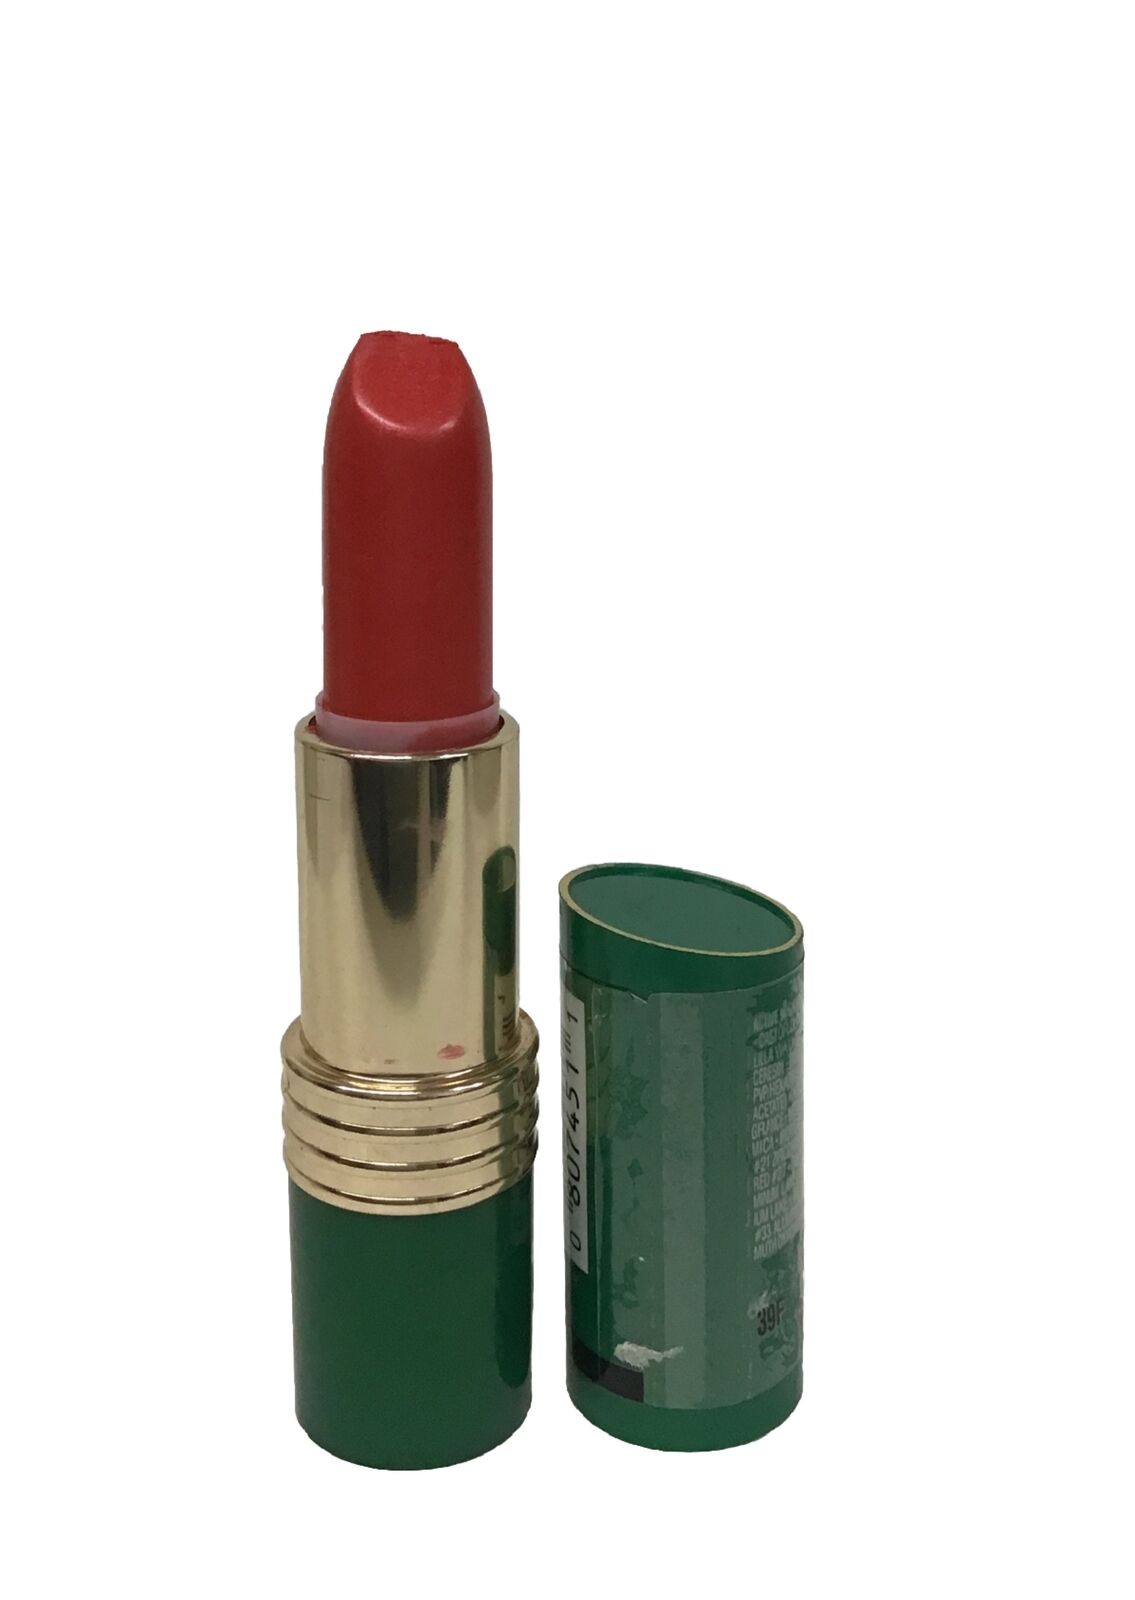 Revlon Moon Drops Lipstick | POPPYSILK RED 45 | Condition As Pictured